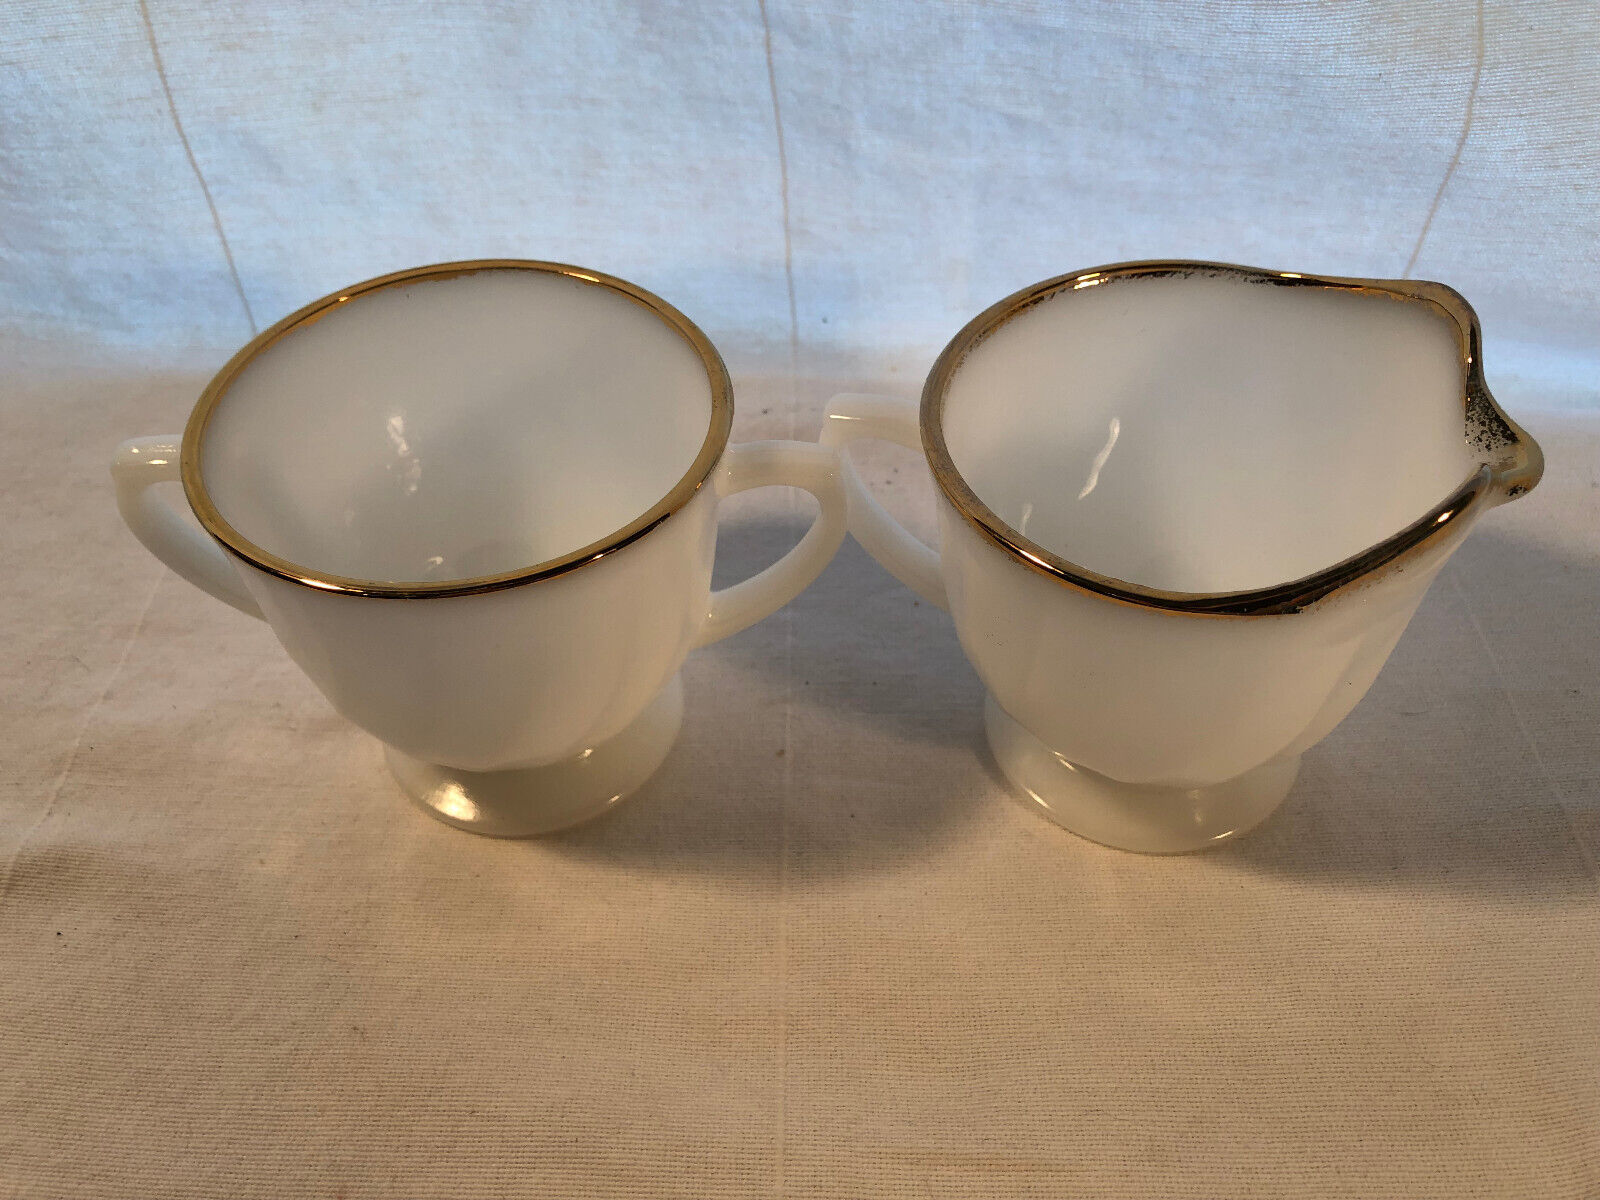 Primary image for Fire King Swirl White With Gold Trim Creamer And Sugar Mint Depression Glass